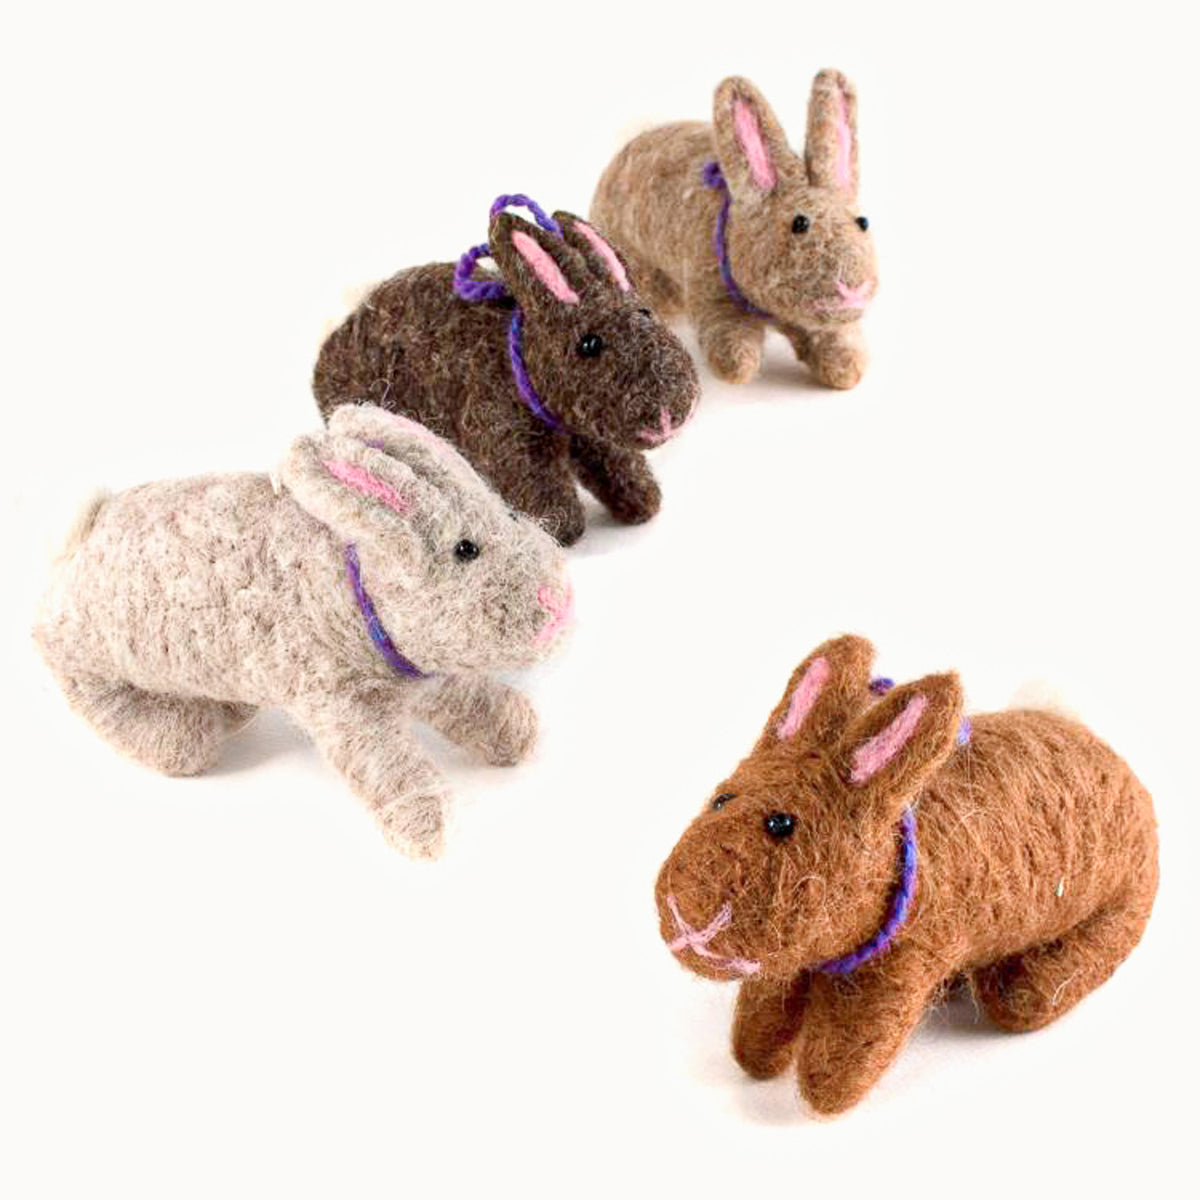 felted wool rabbits - various colors